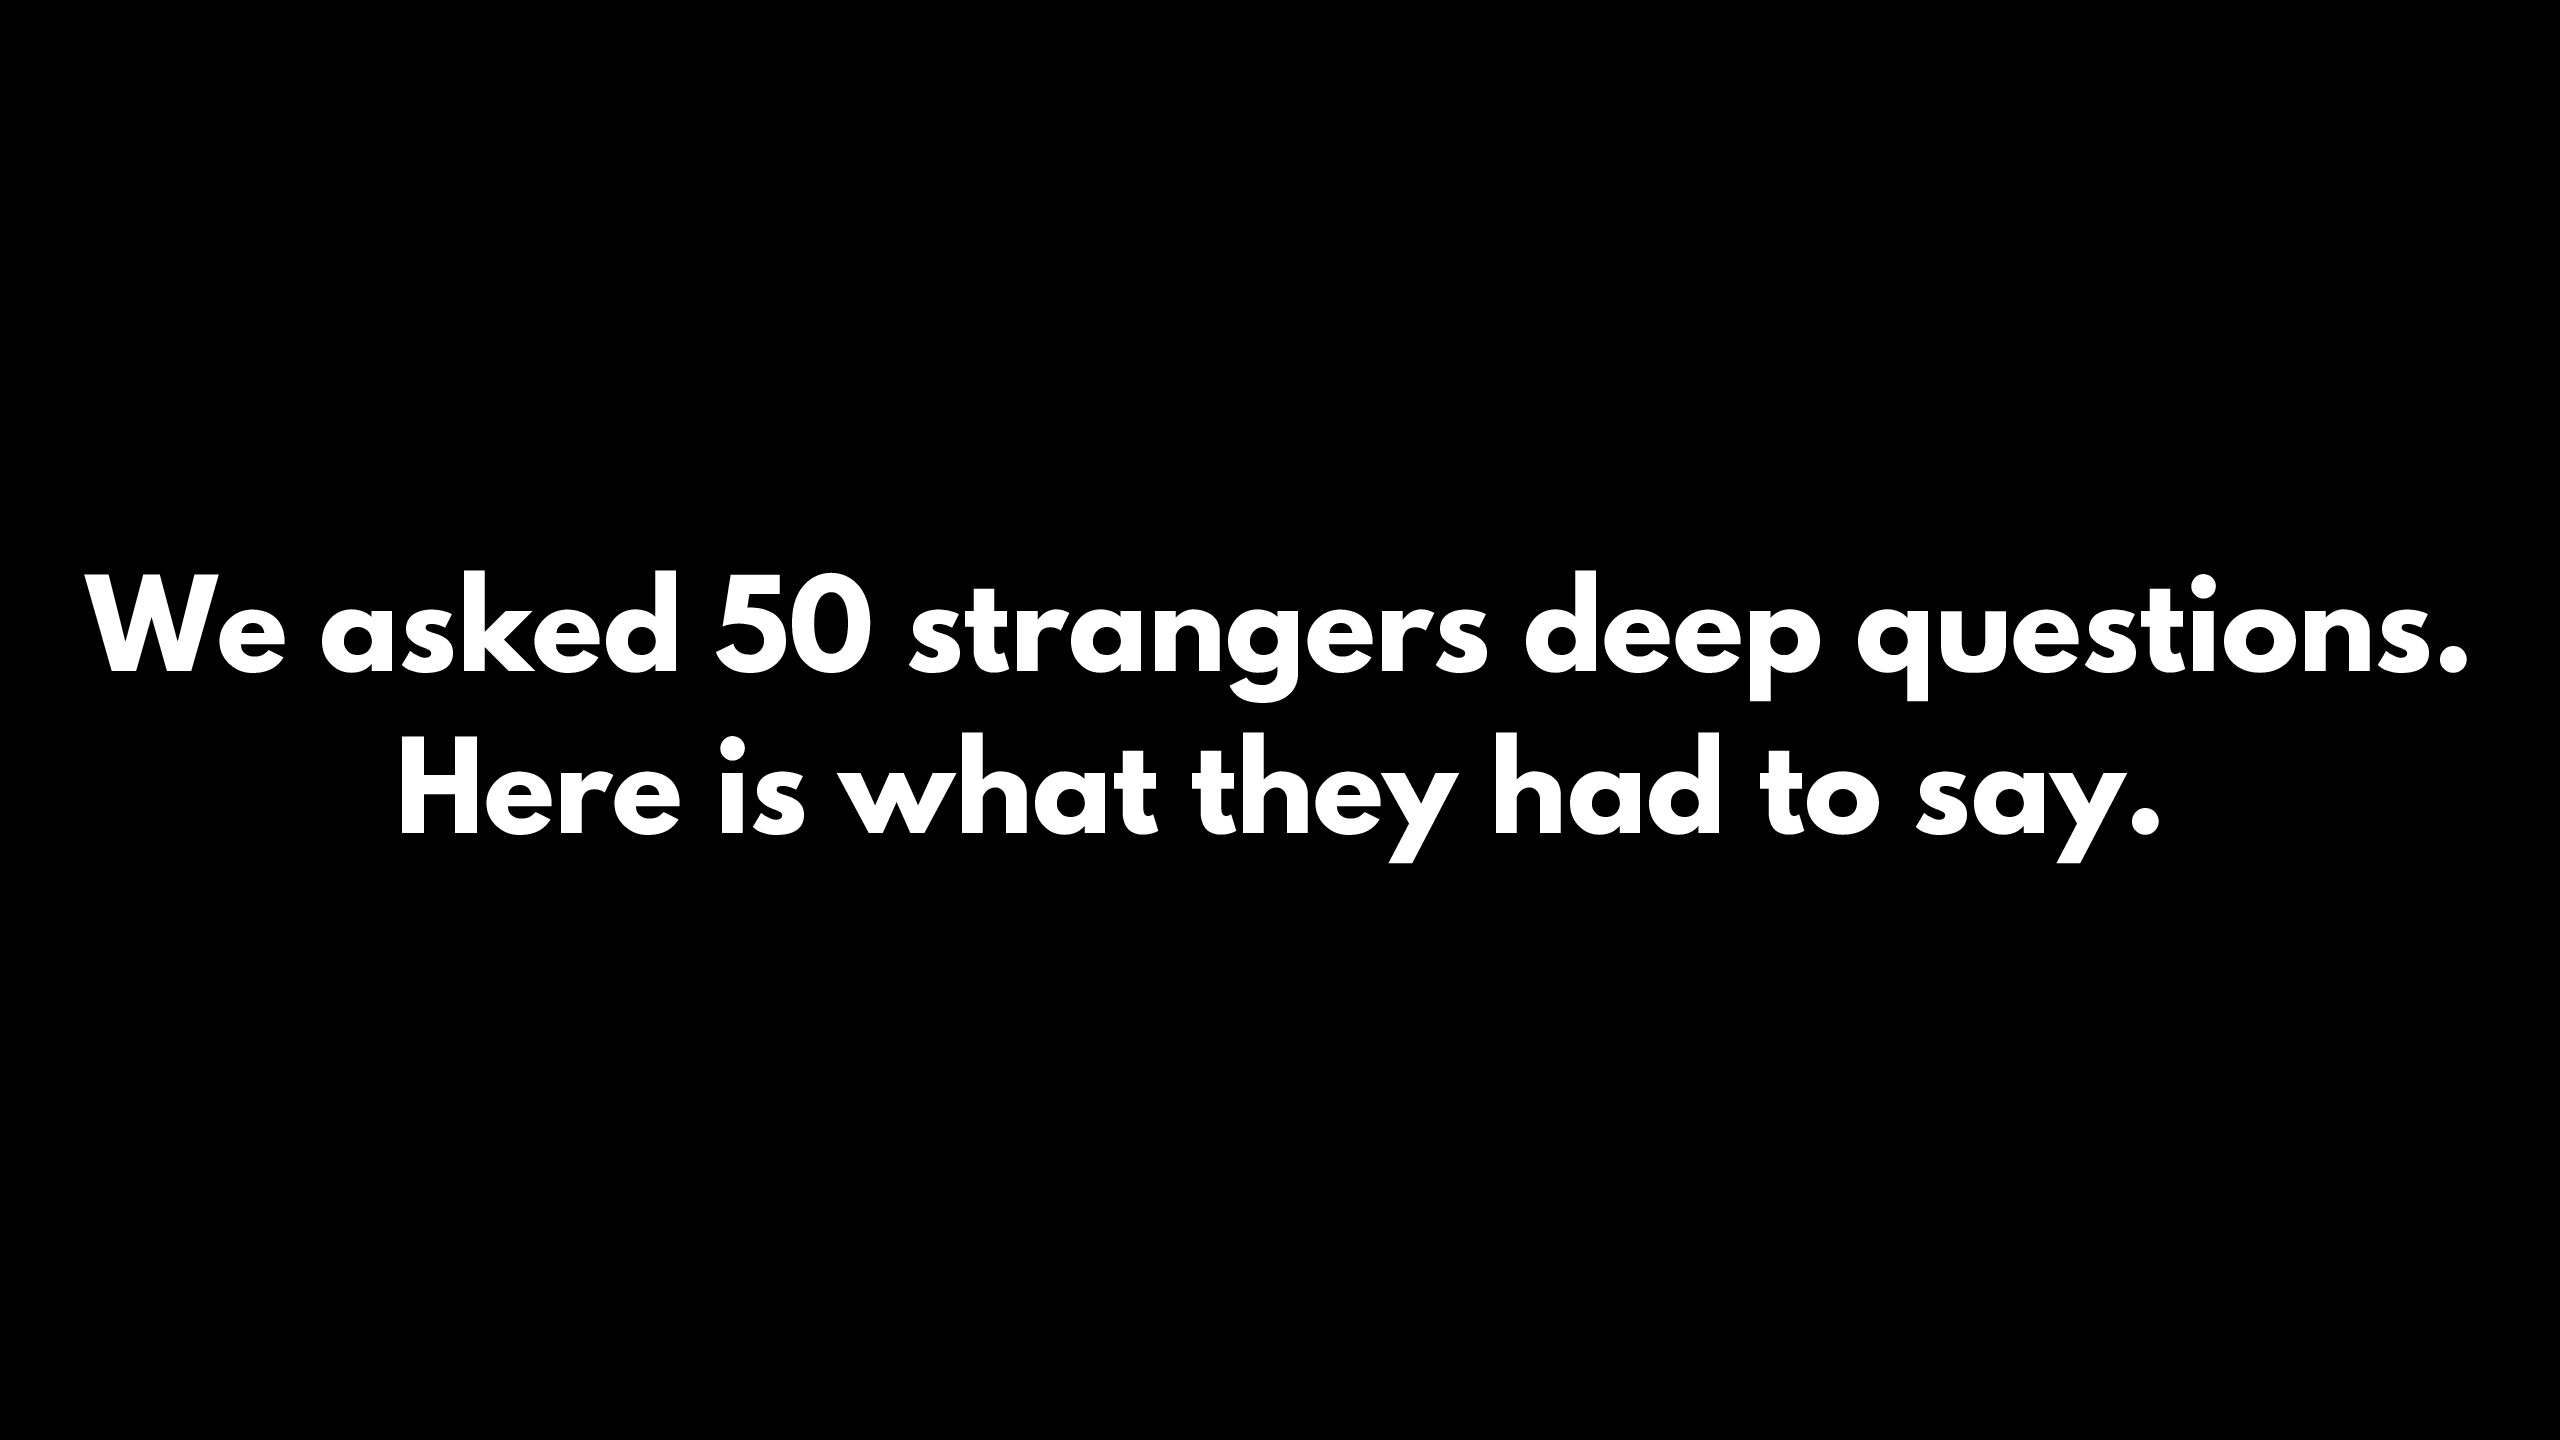 Navigation to Story: We asked 50 strangers deep questions. Here is what they had to say.